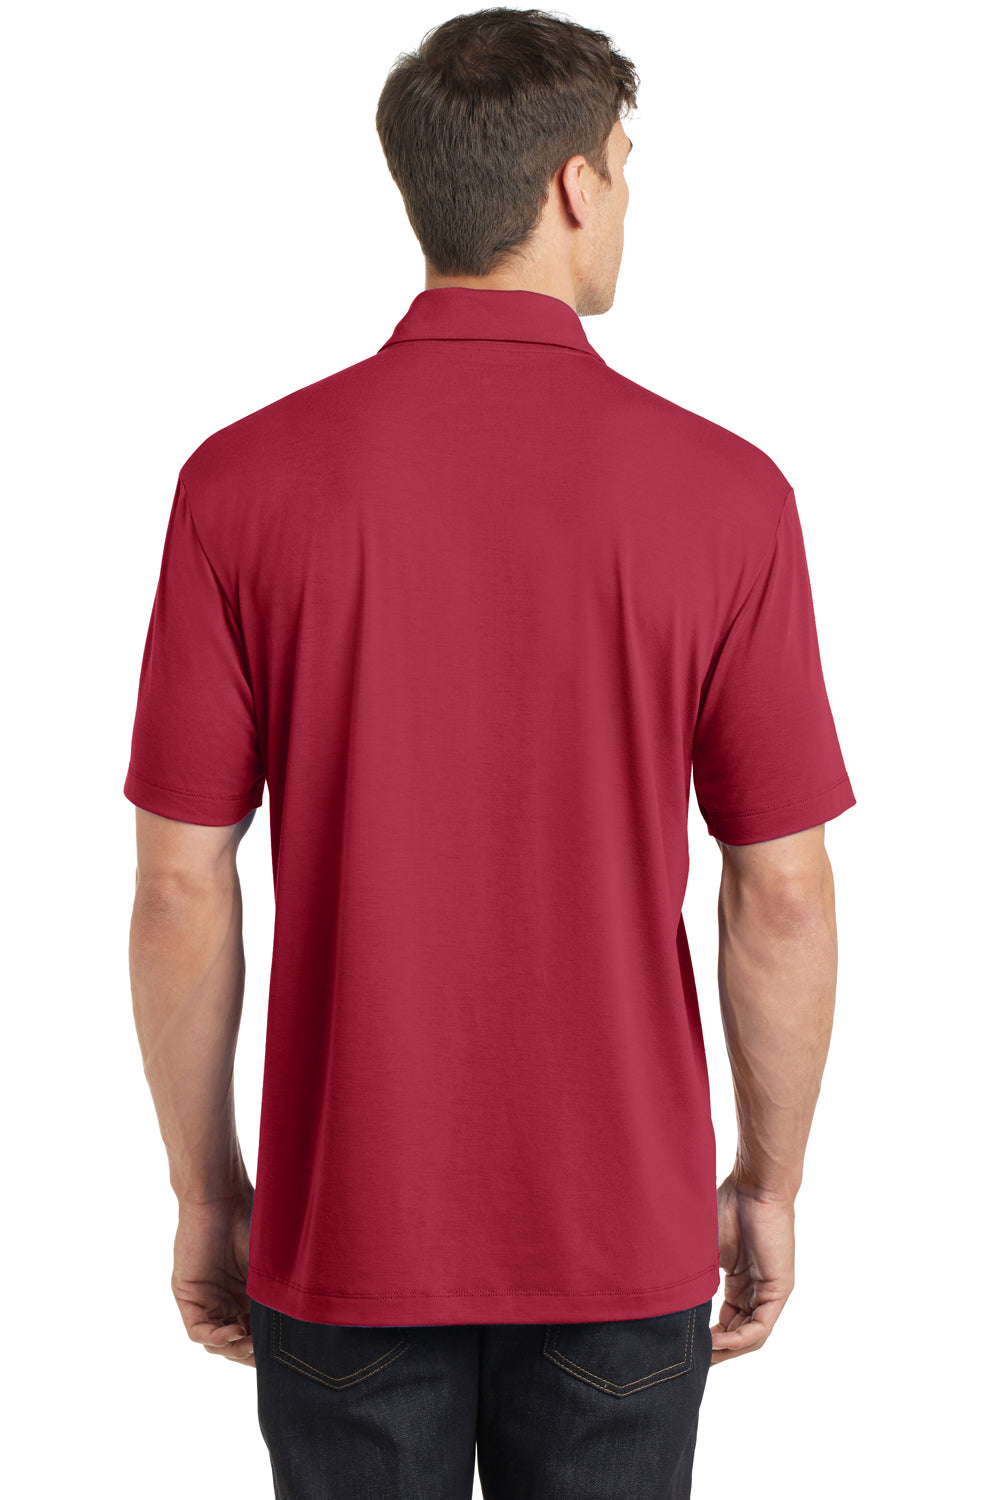 Port Authority K568 Mens Cotton Touch Performance Moisture Wicking Short Sleeve Polo Shirt Red Back